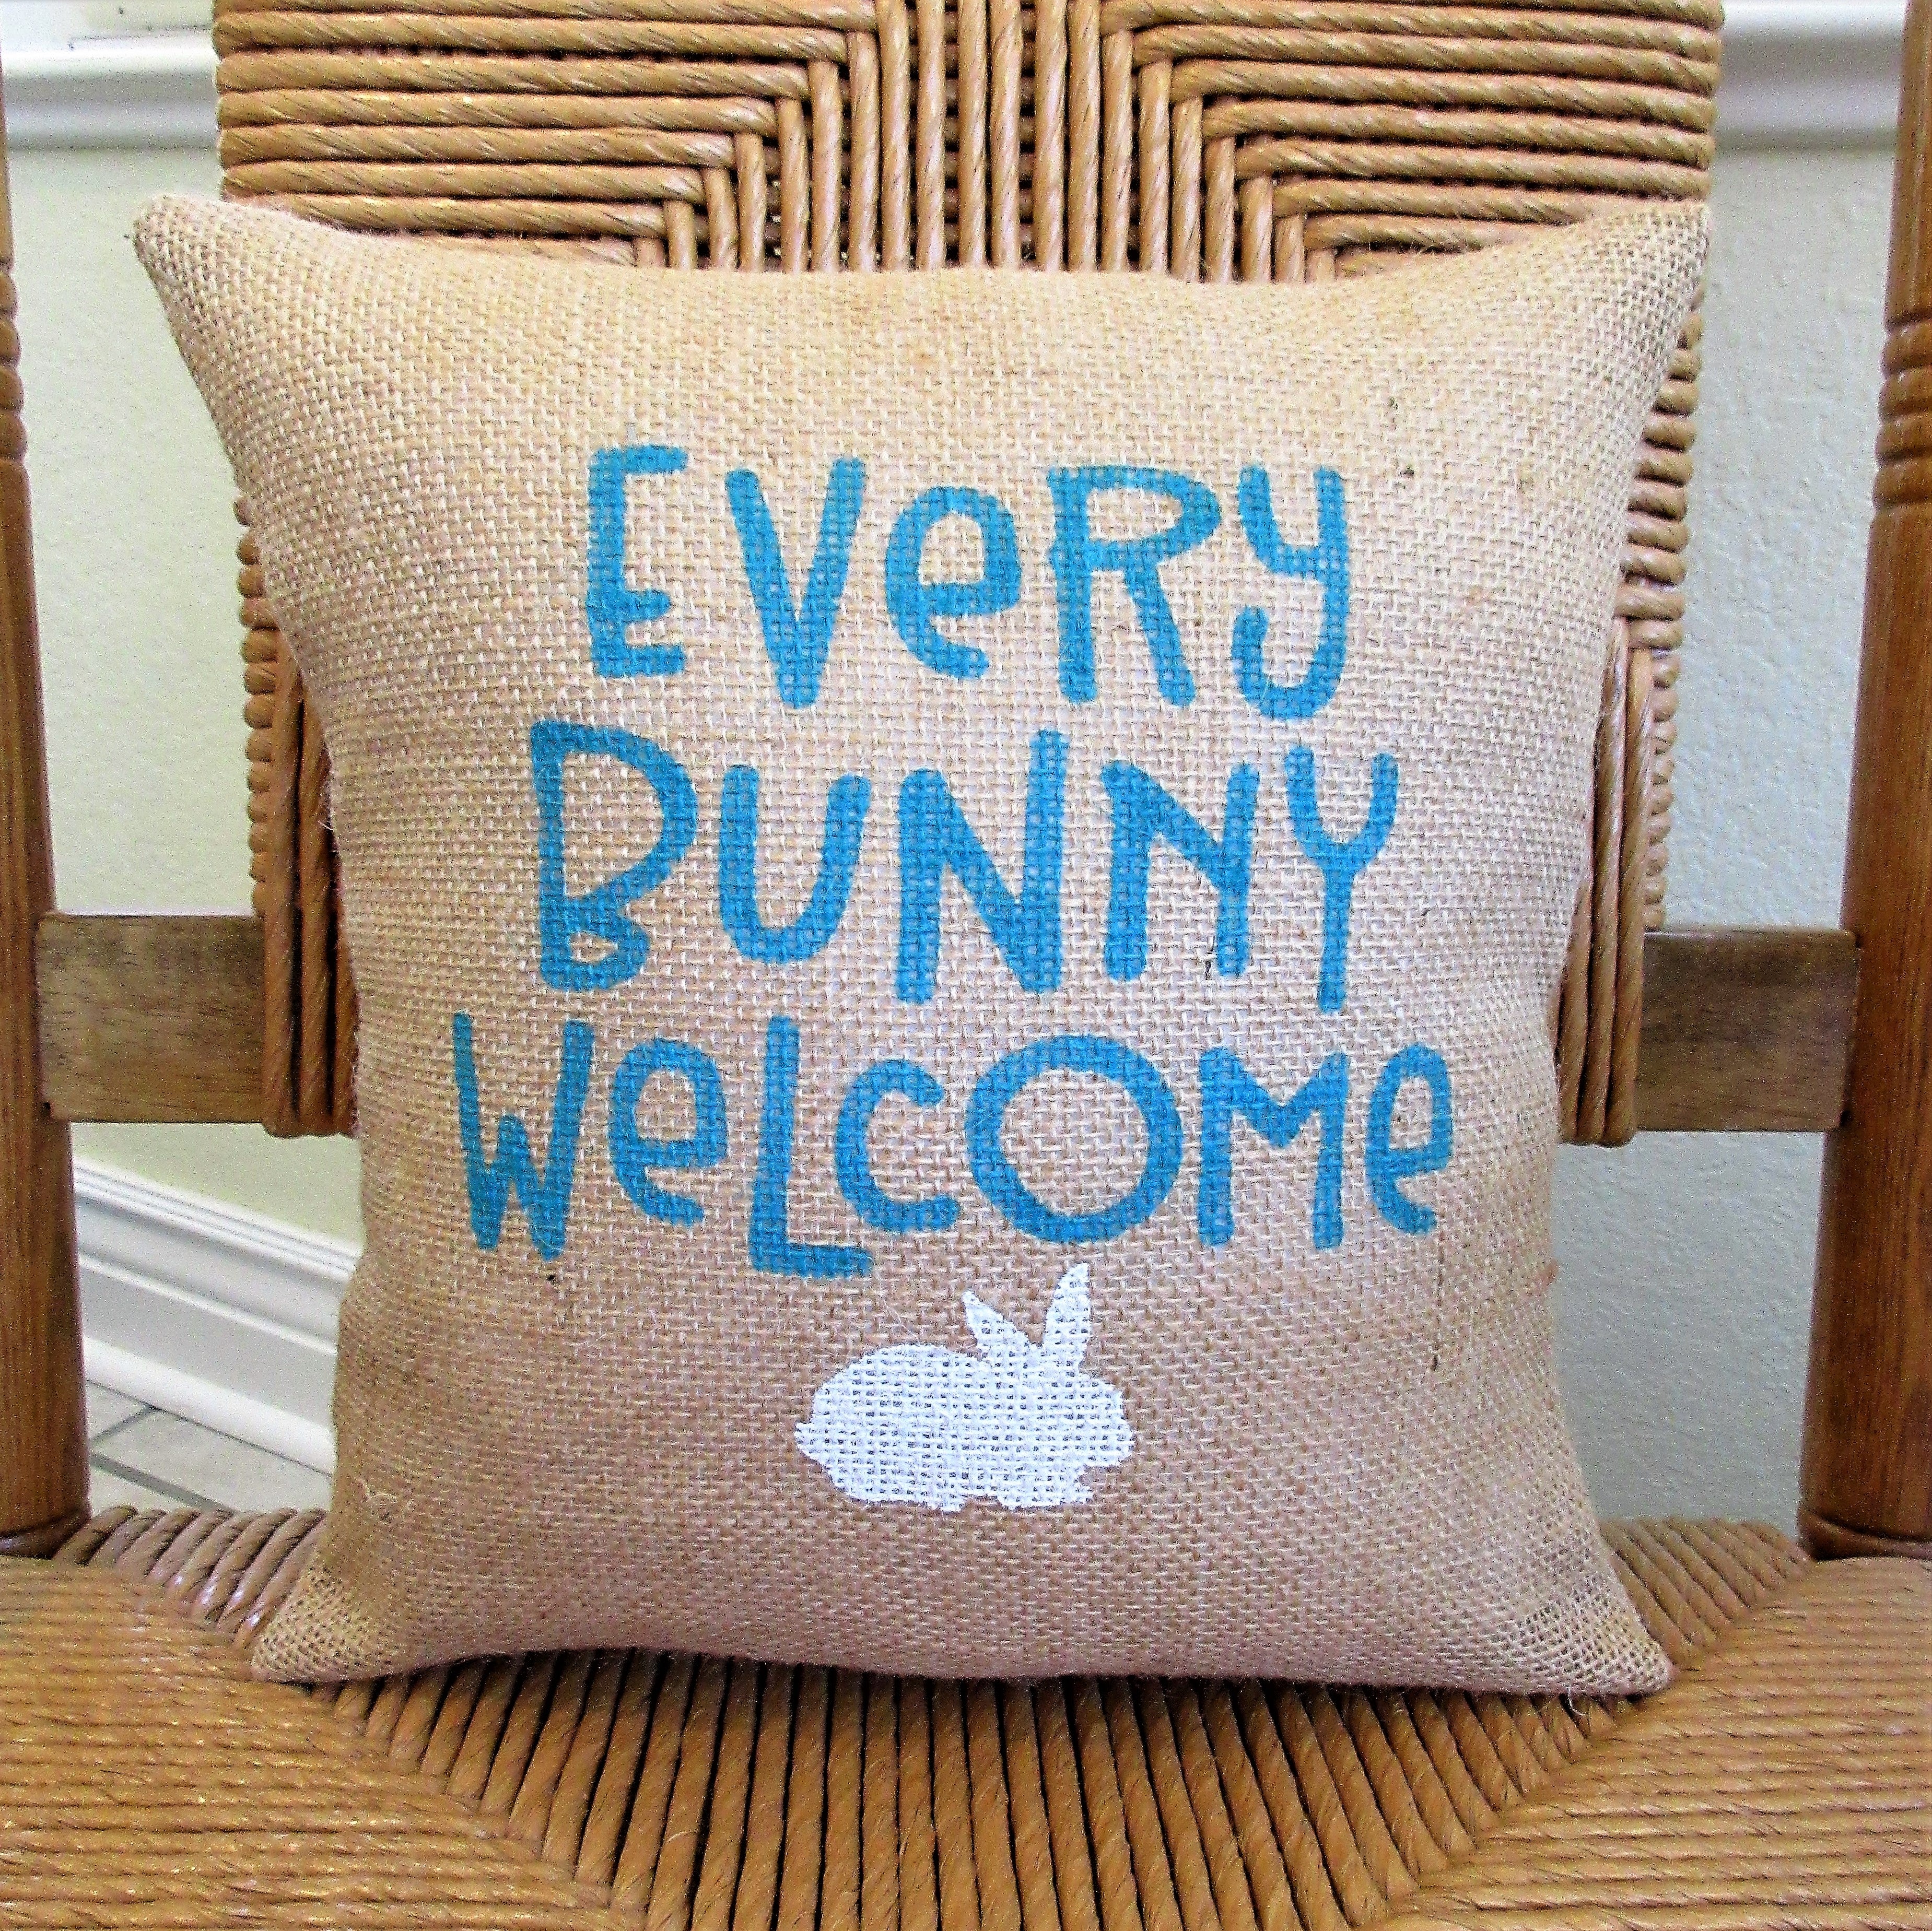 Every Bunny Welcome burlap pillow